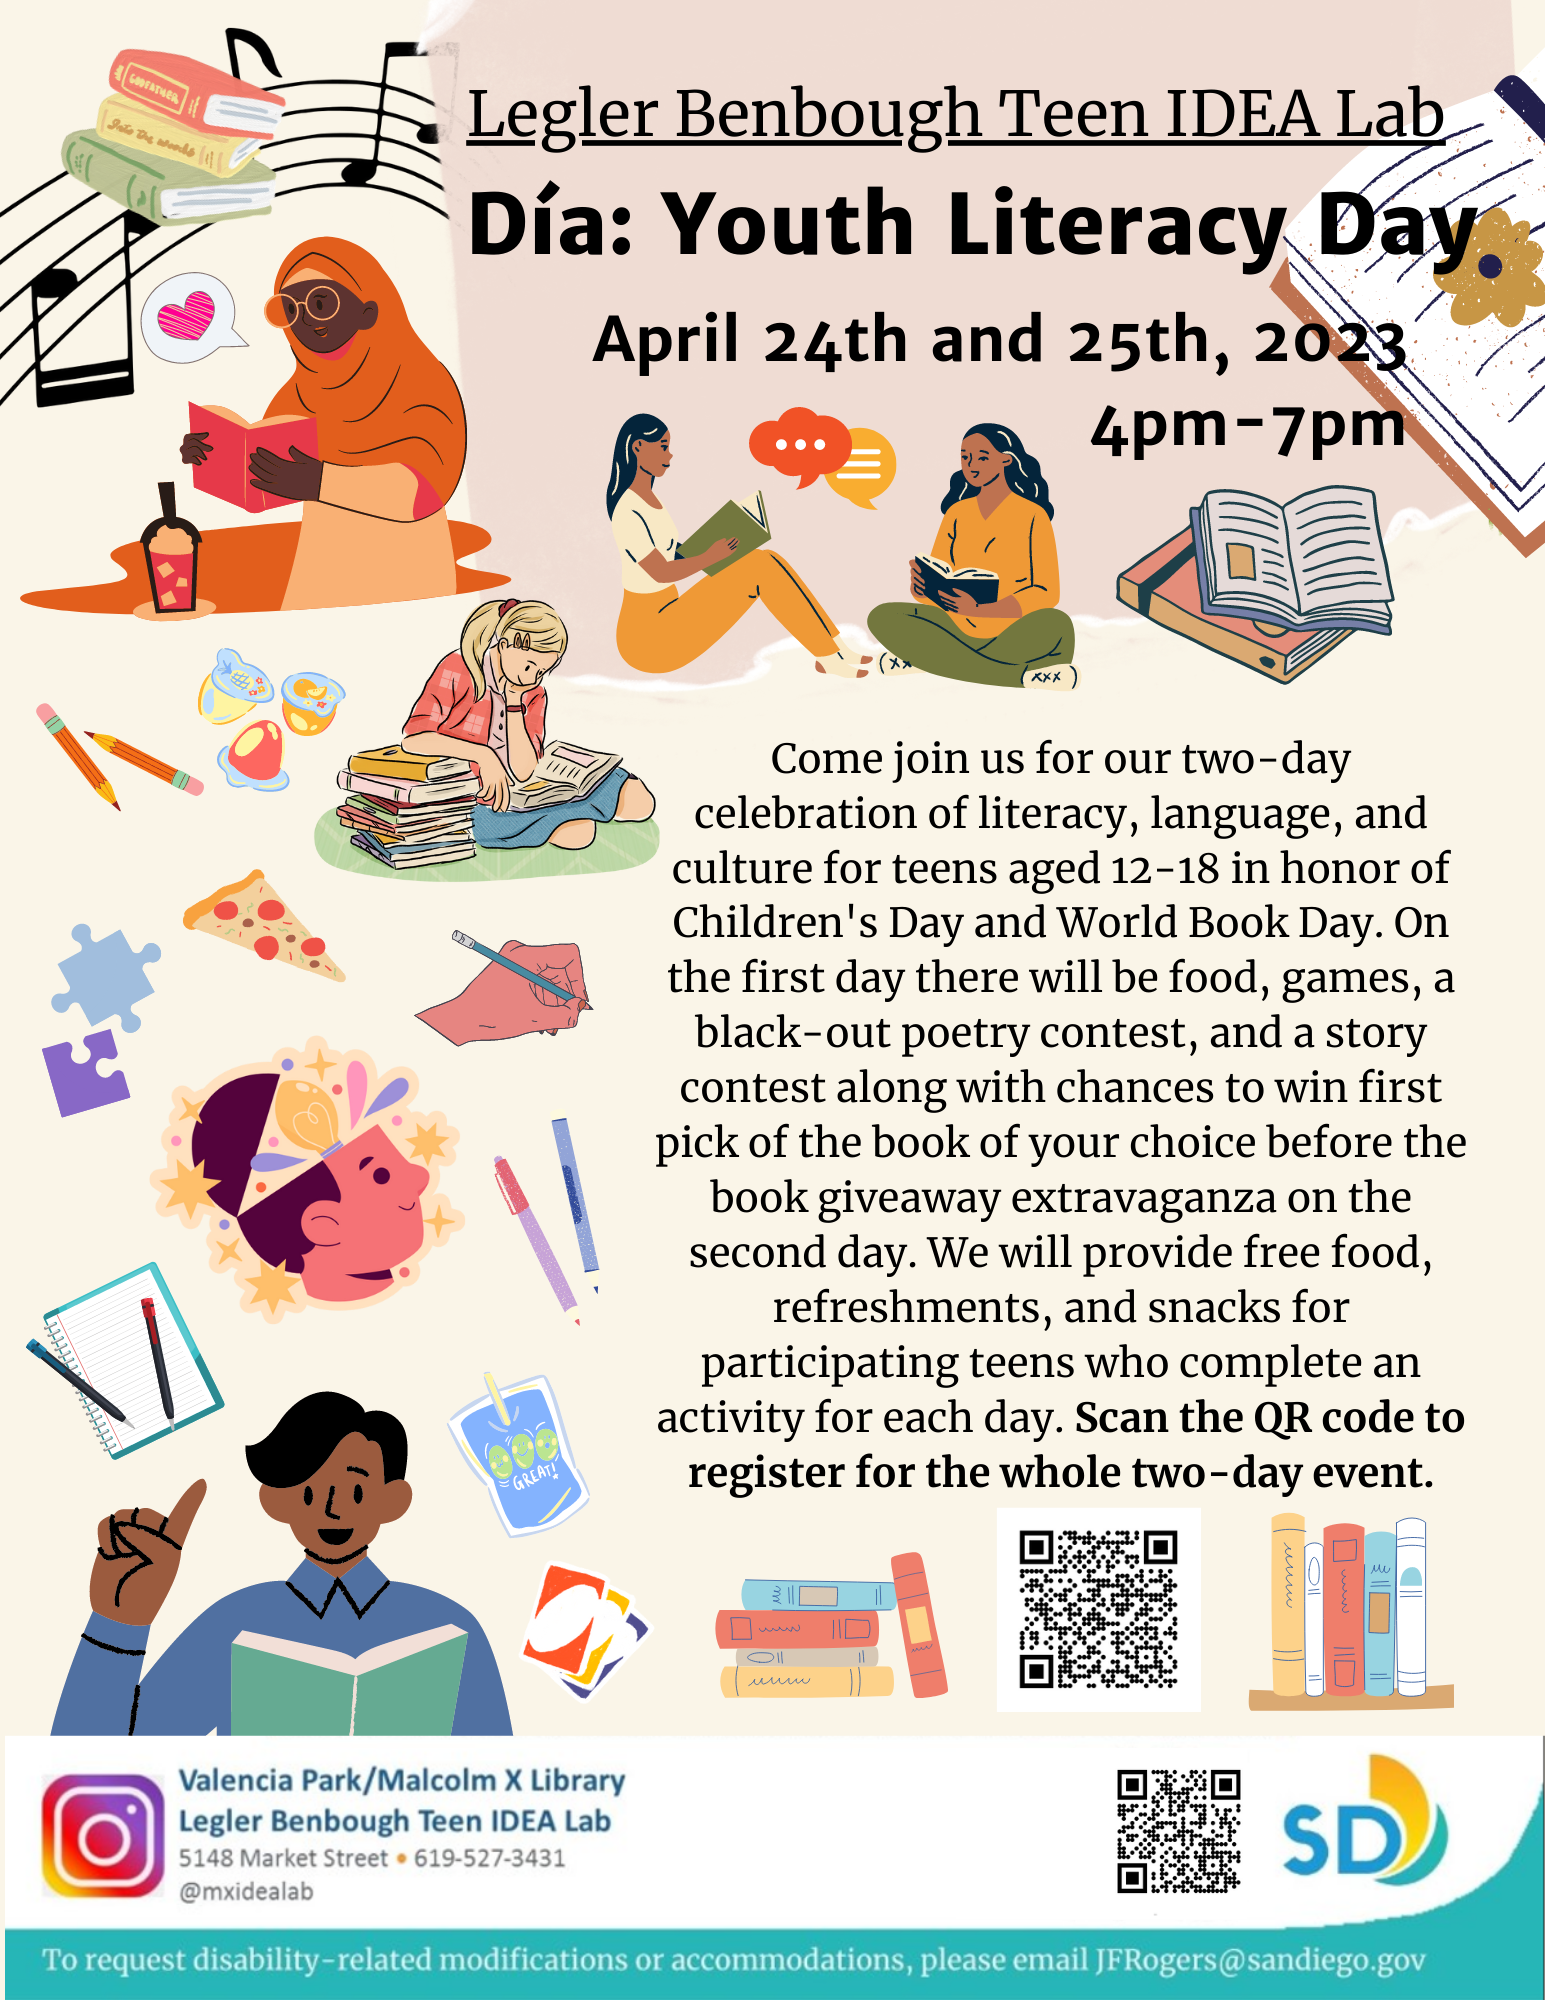 DIA Youth Literacy Day 1 flyer listing activities for the program.